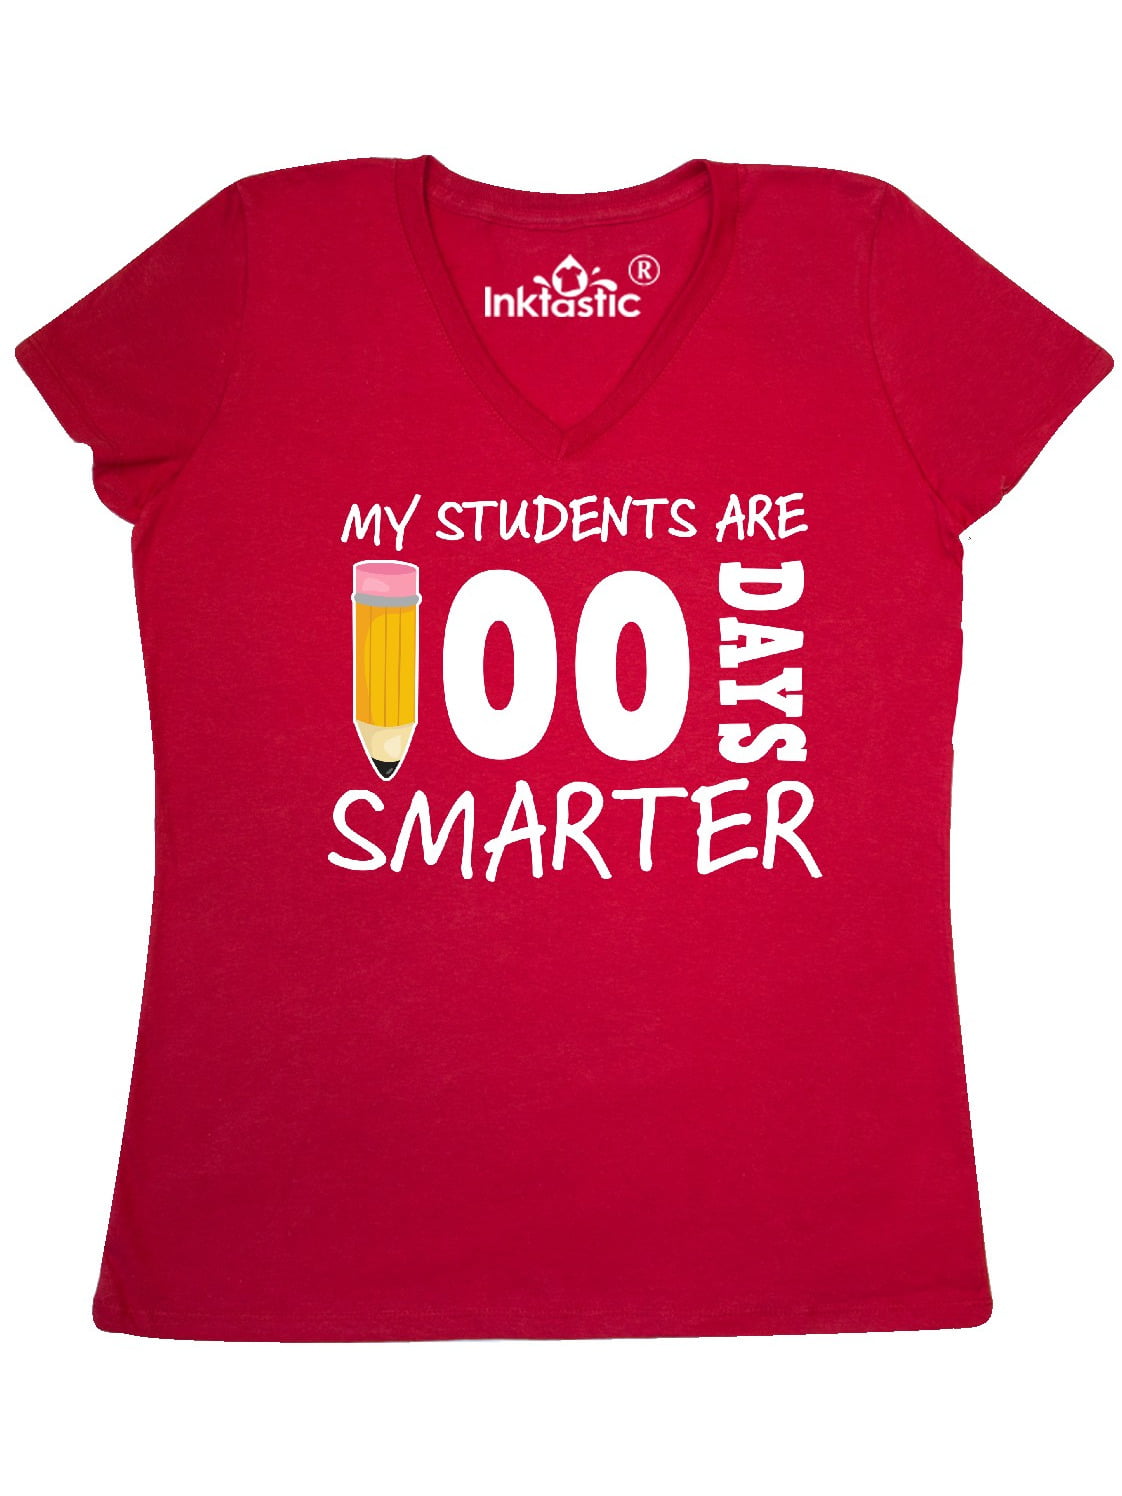 My students are 100 days smarter shirt